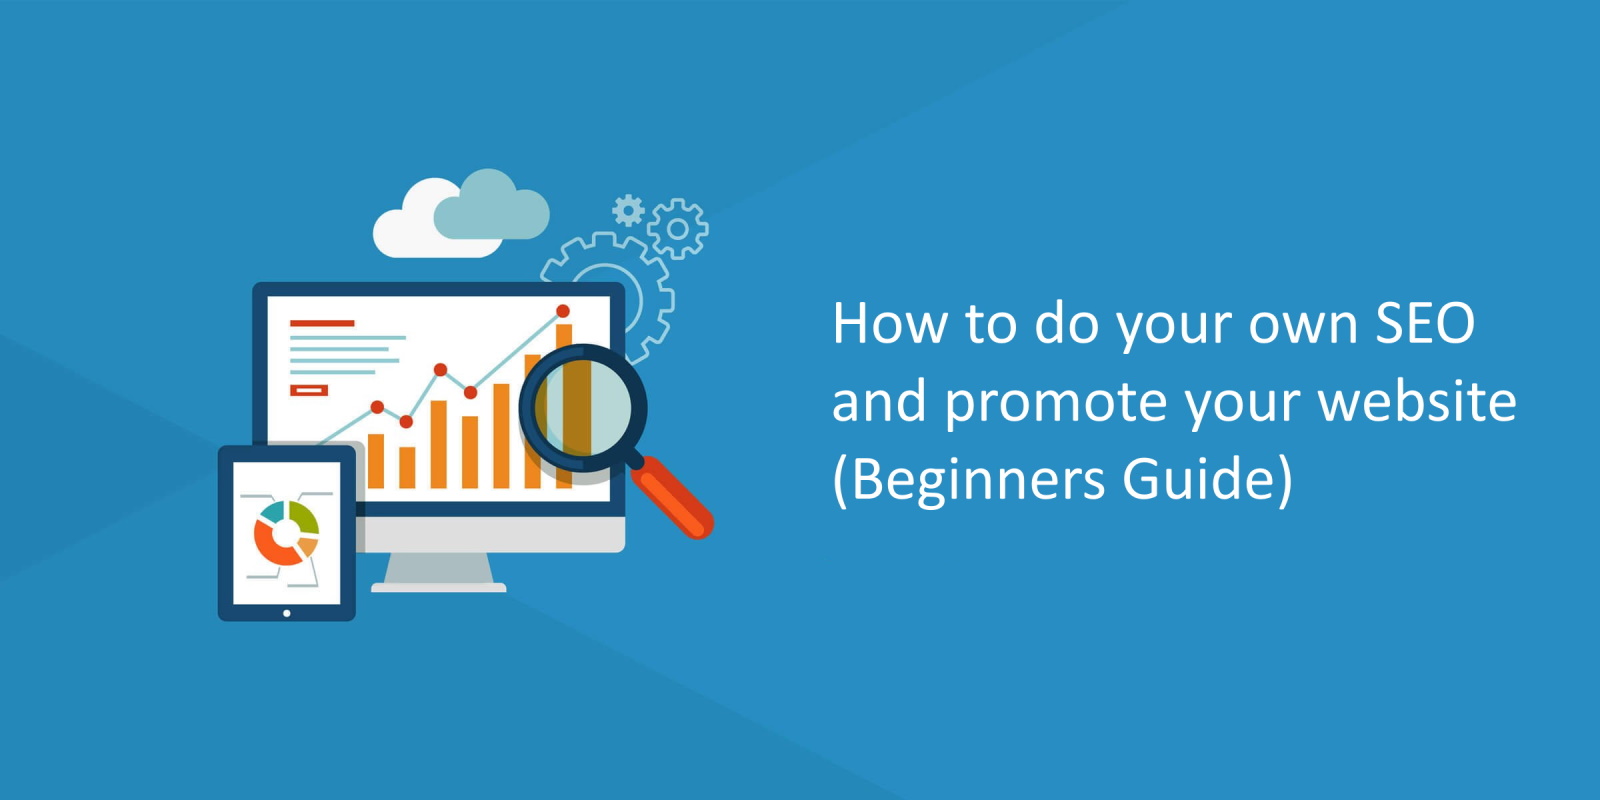 How to do your own SEO and promote your website